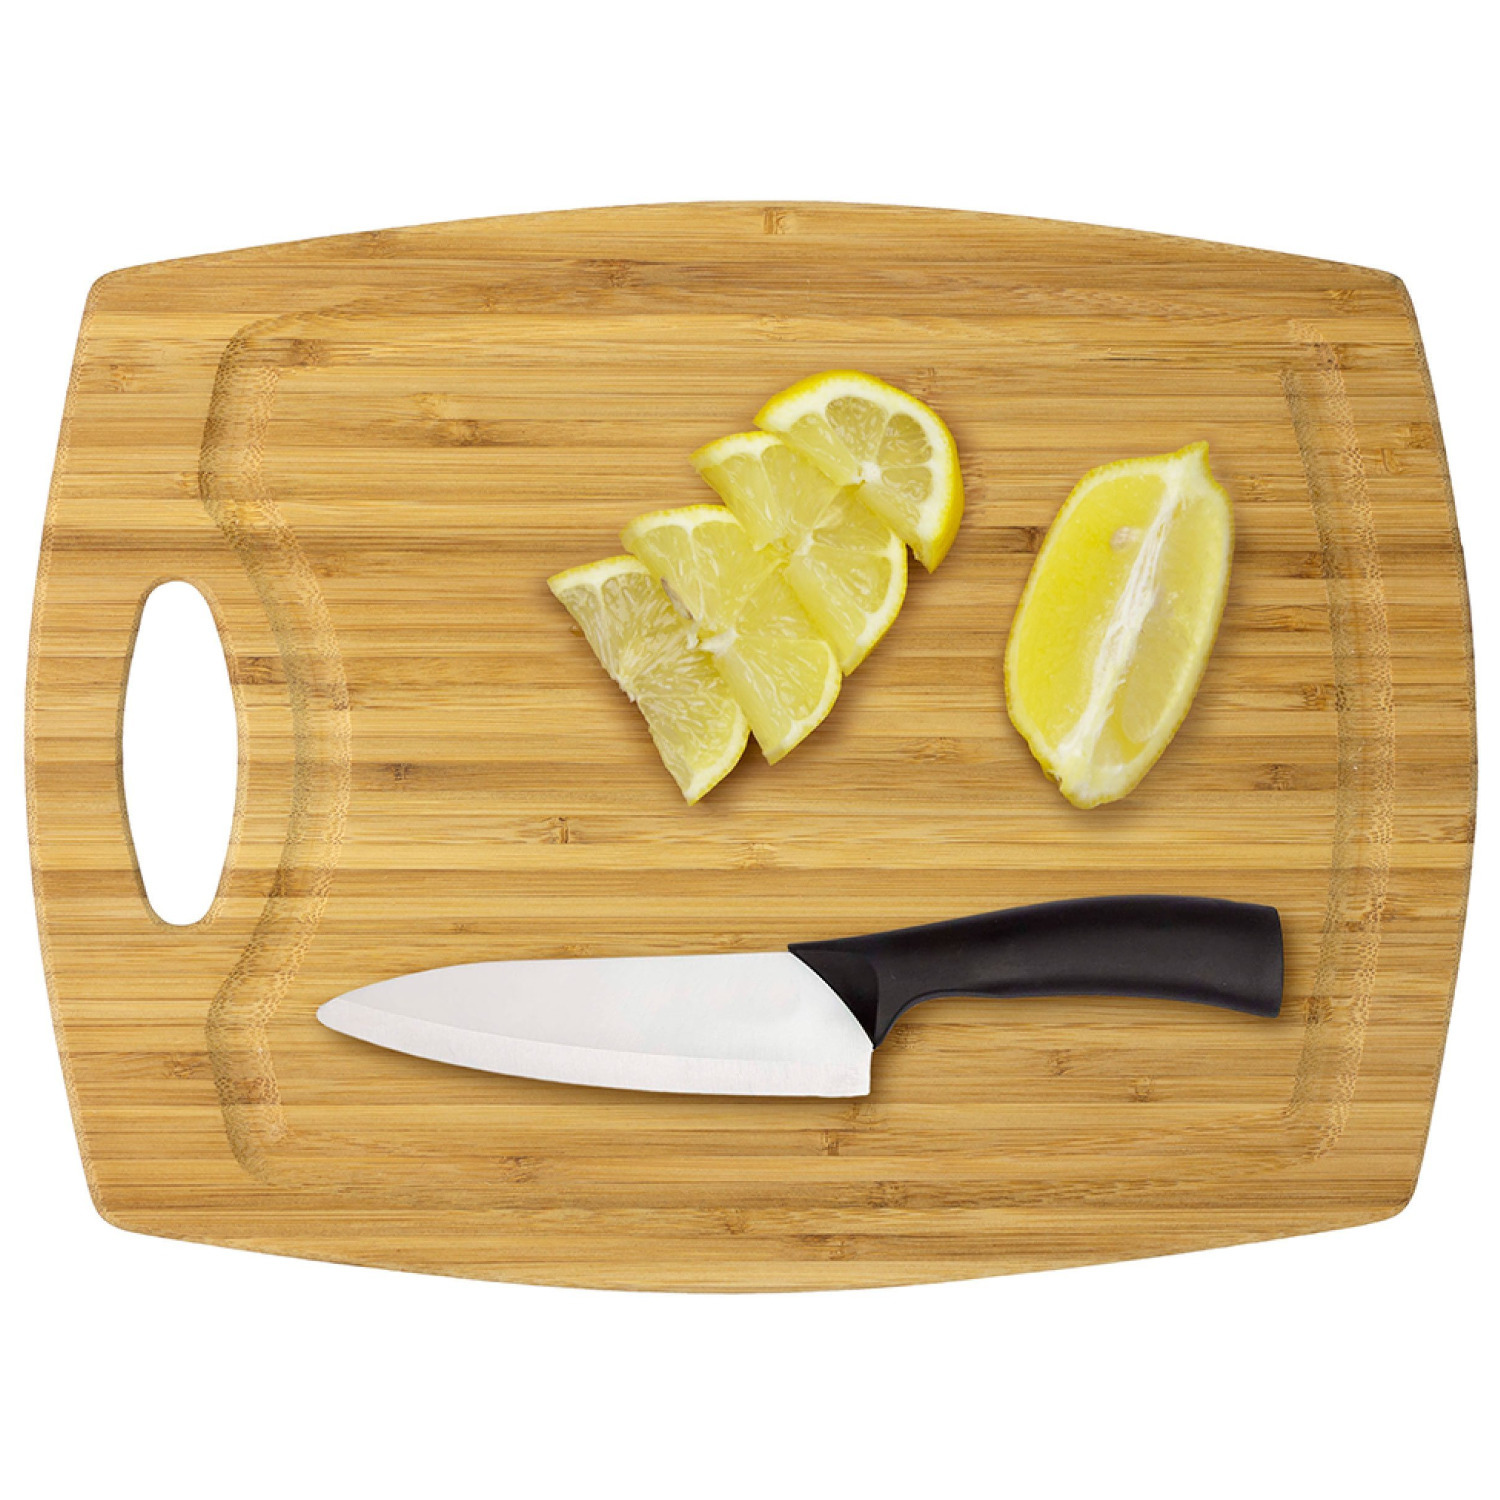 Totally Bamboo 12" Greenlite Dishwasher Safe Cutting Board - image 3 of 5